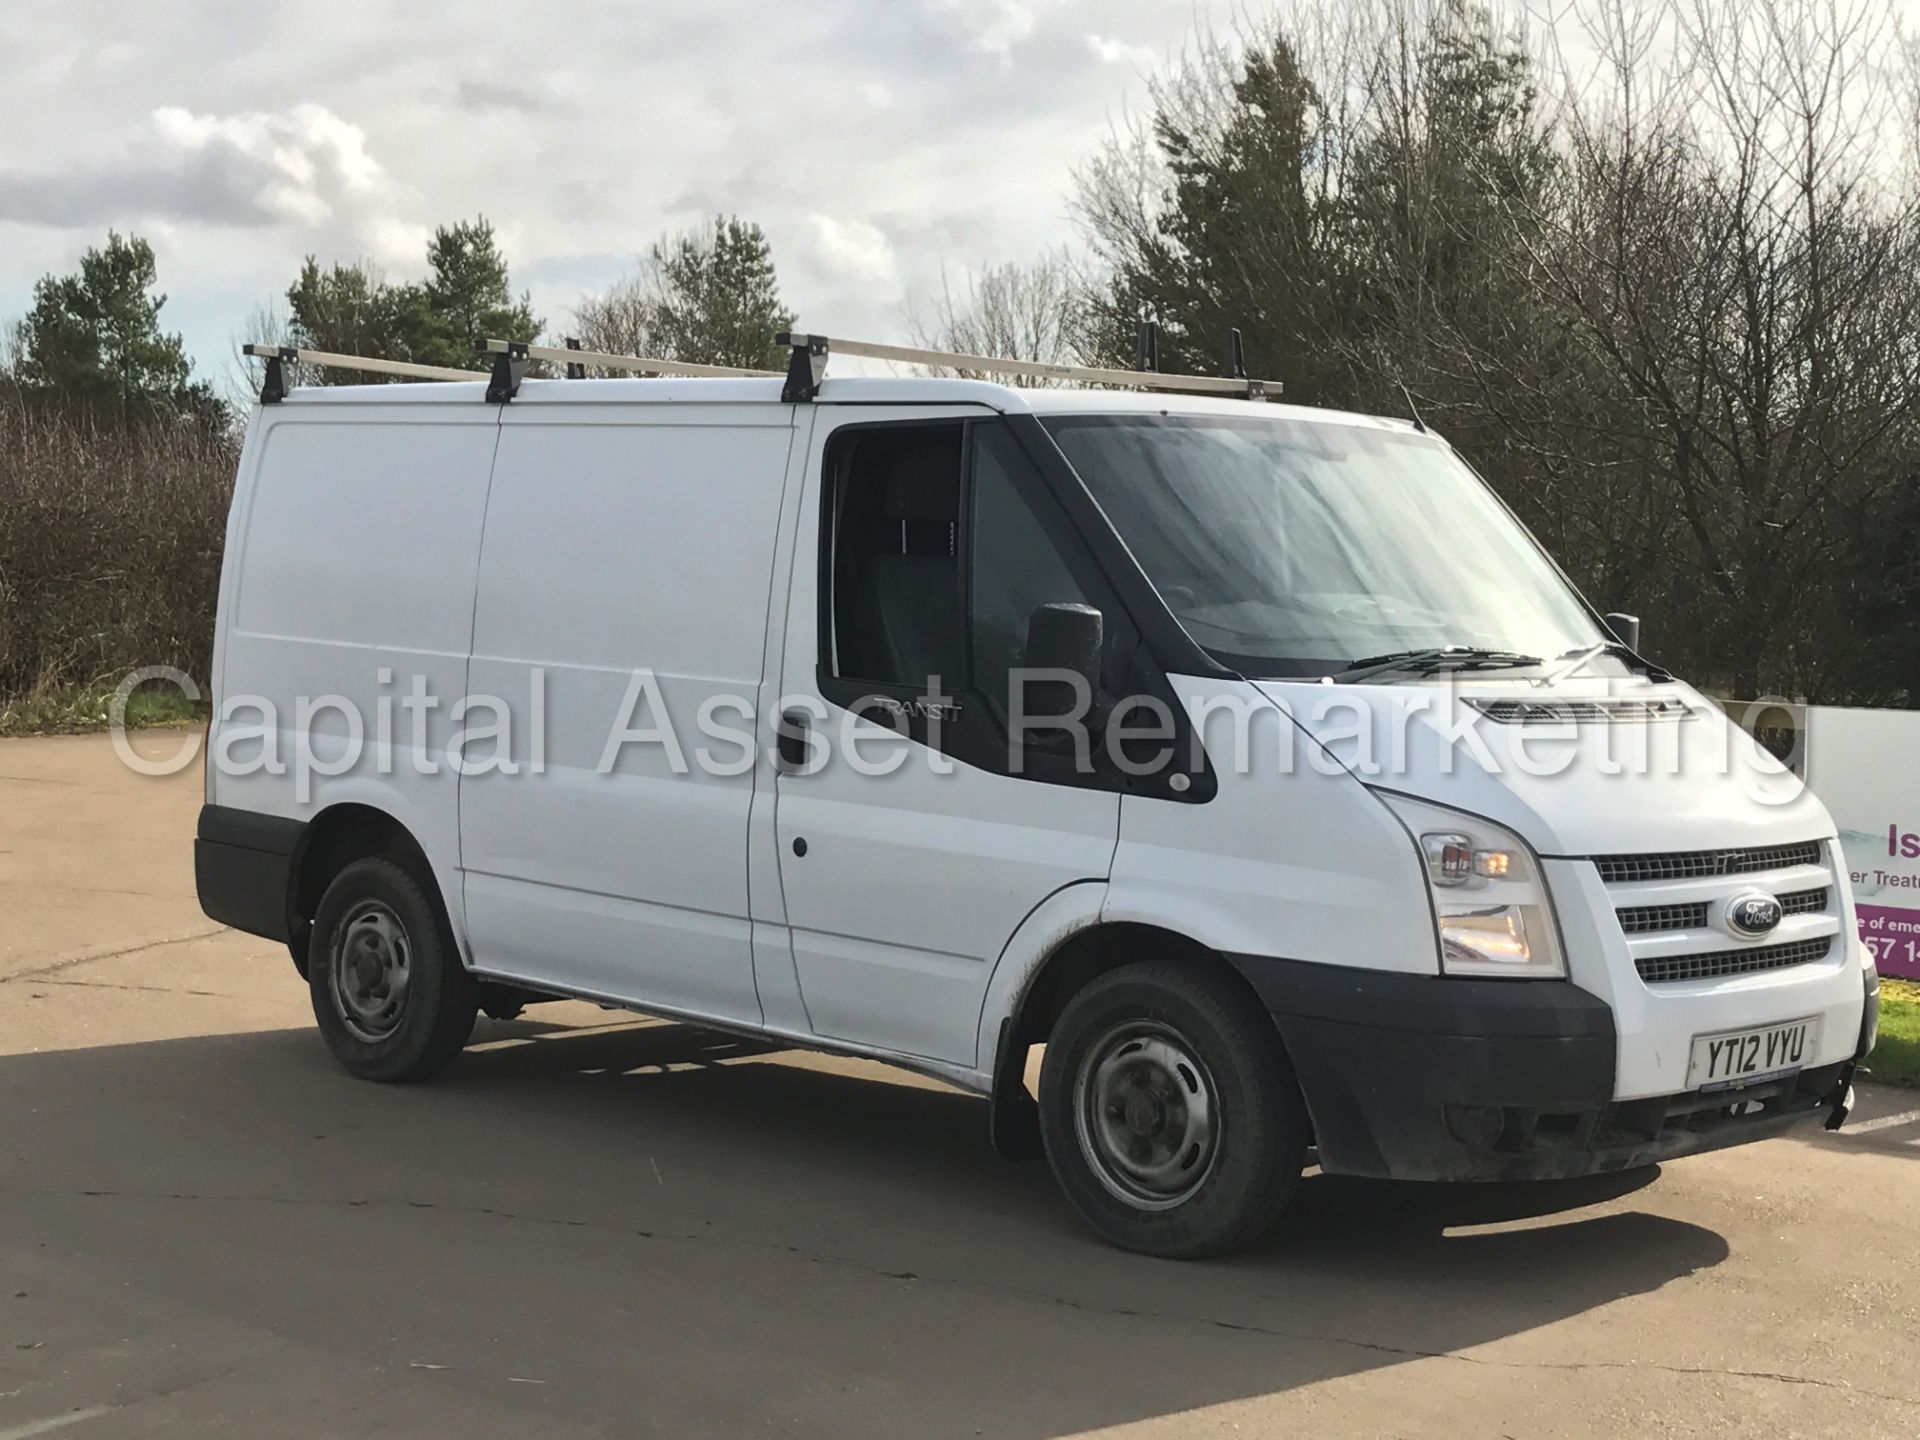 (On Sale) FORD TRANSIT 100 T280 FWD (2012) '2.2 TDCI - SWB - 100 PS - 6 SPEED' (1 FORMER KEEPER)